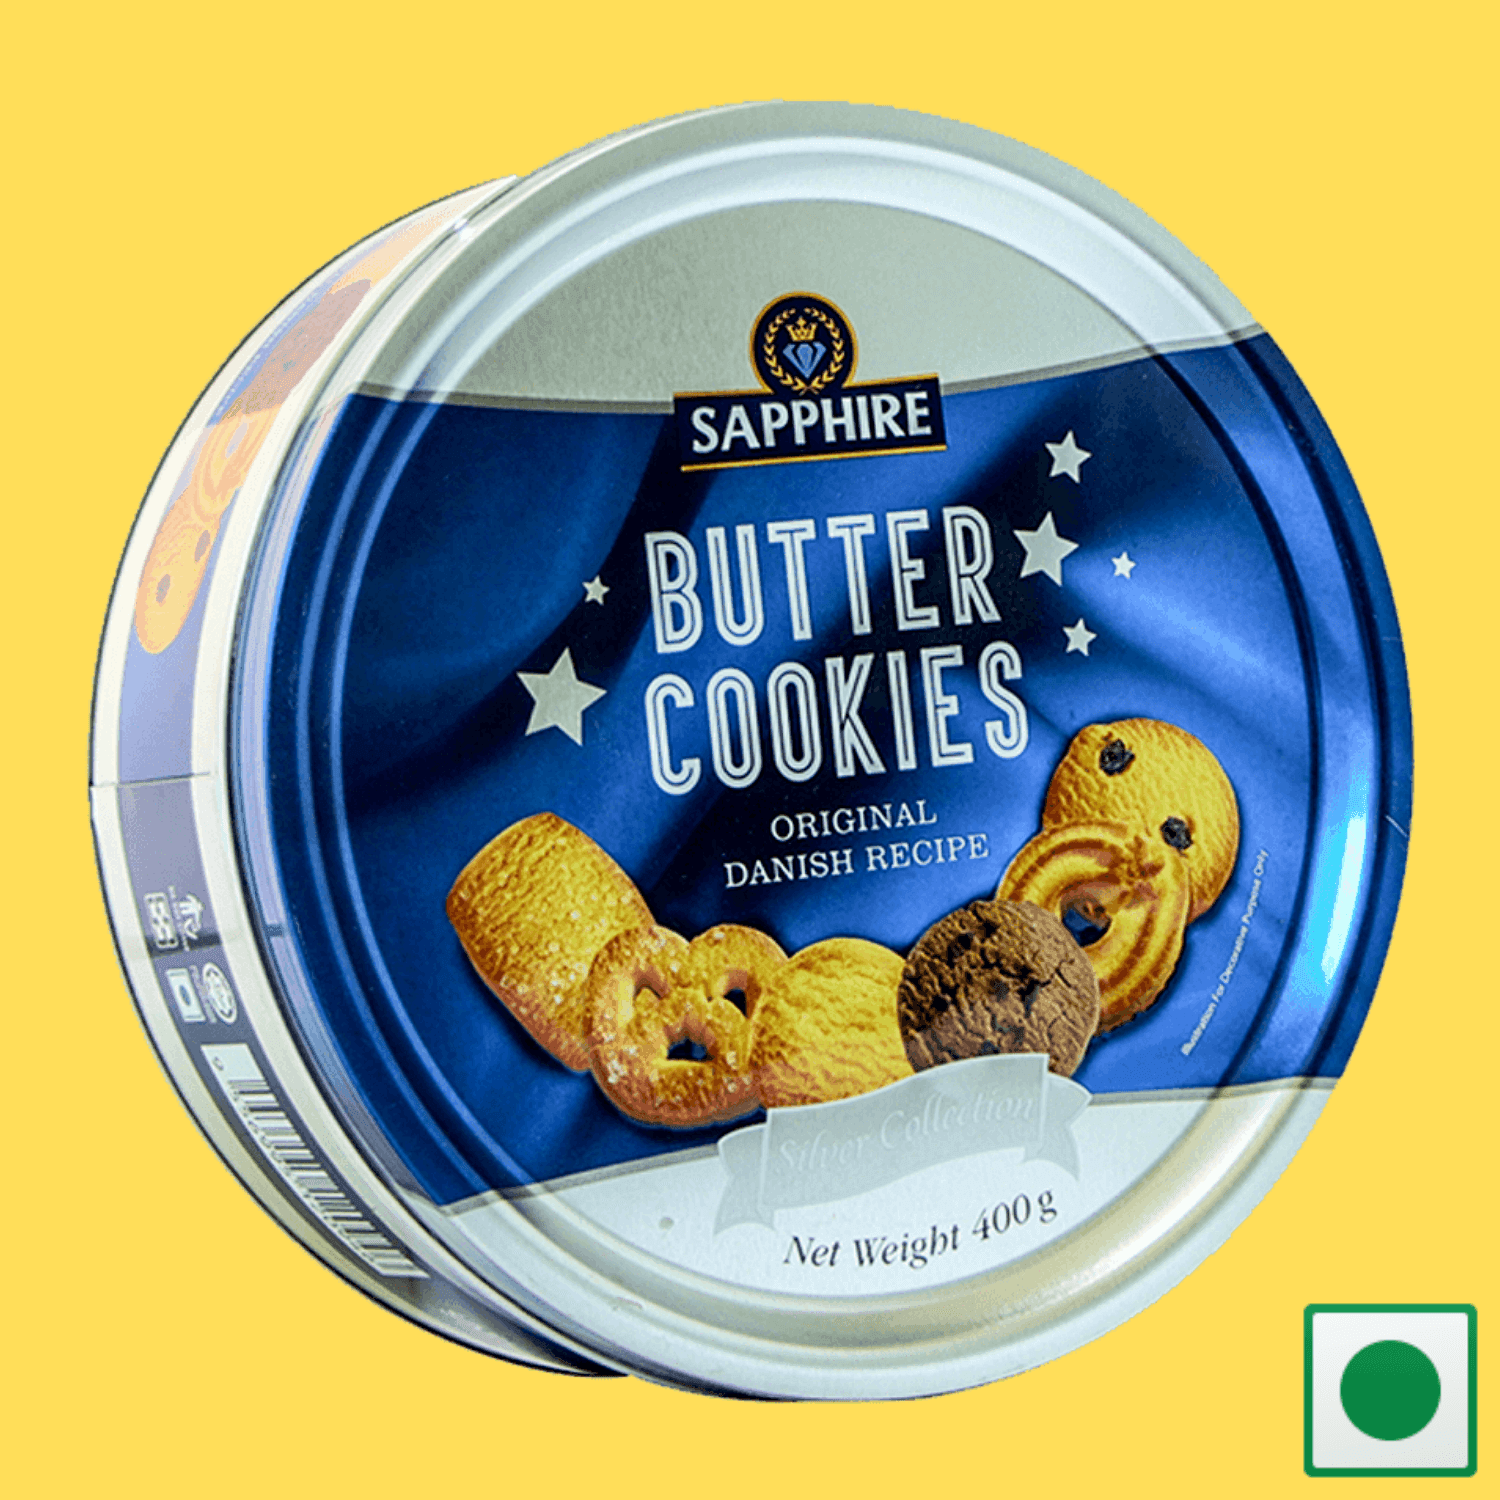 Sapphire Butter Cookies, Silver Collection, 400g (Imported) - Super 7 Mart